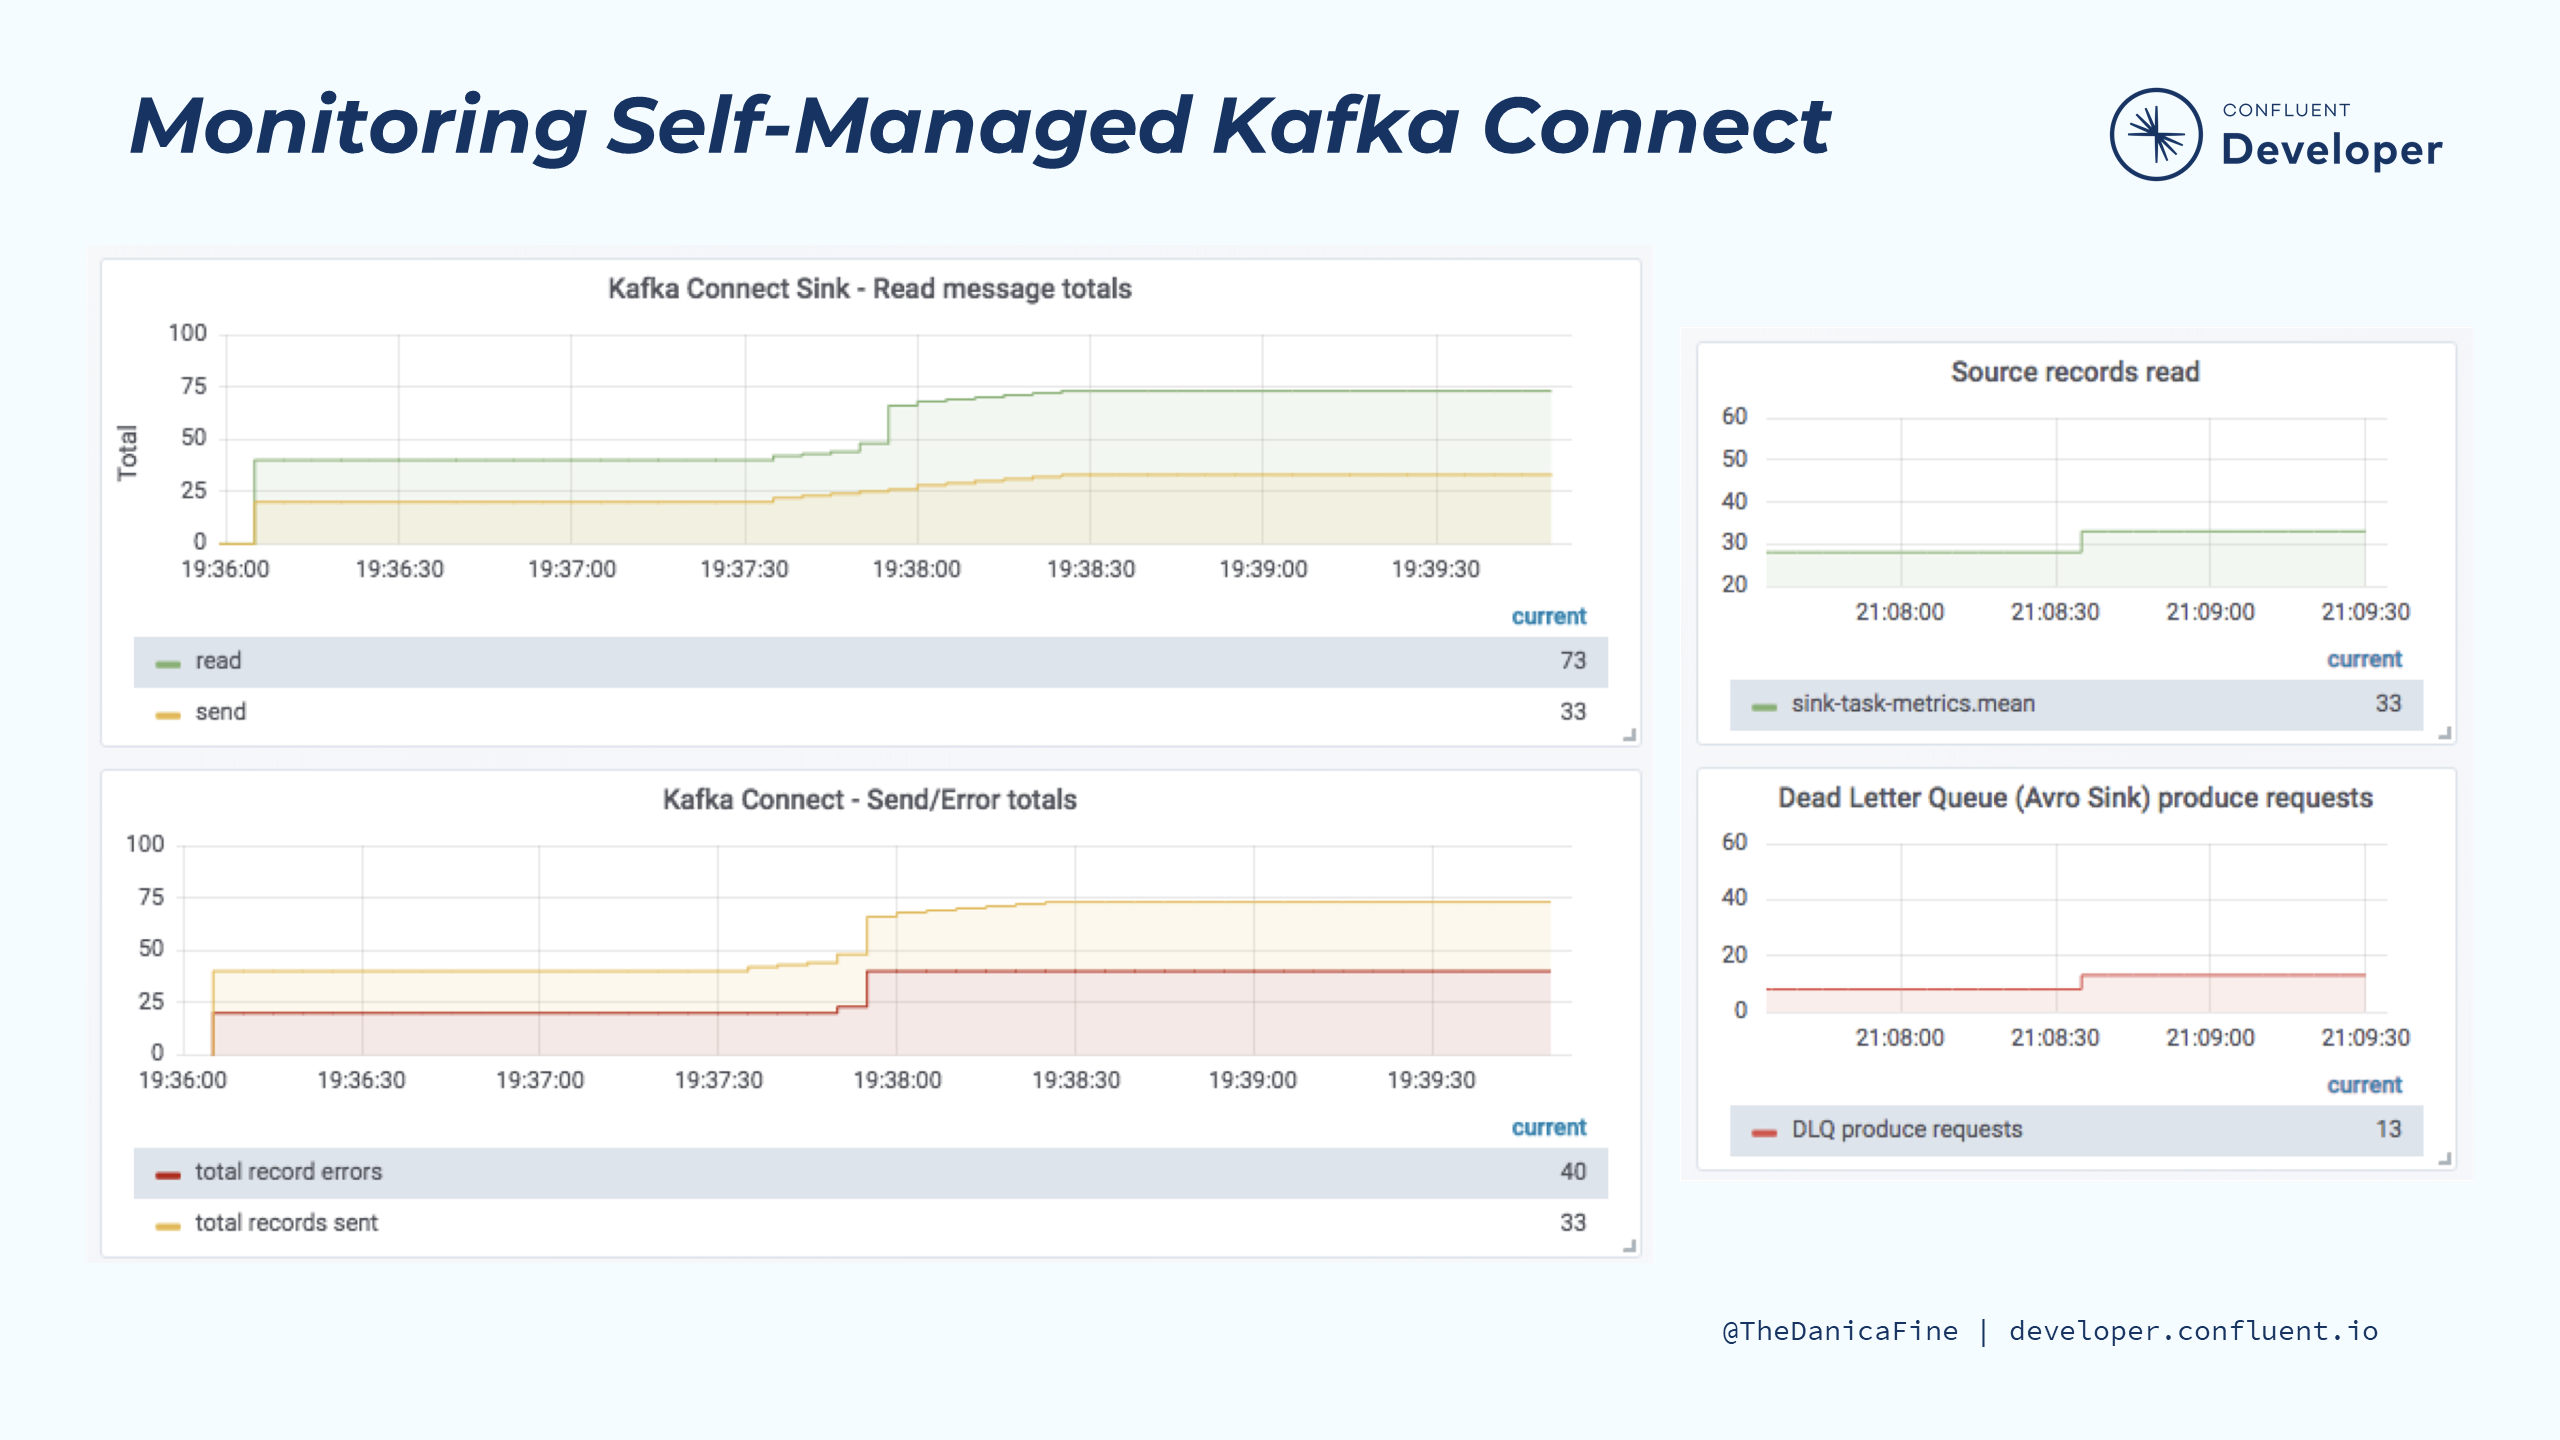 monitoring-self-managed-connect